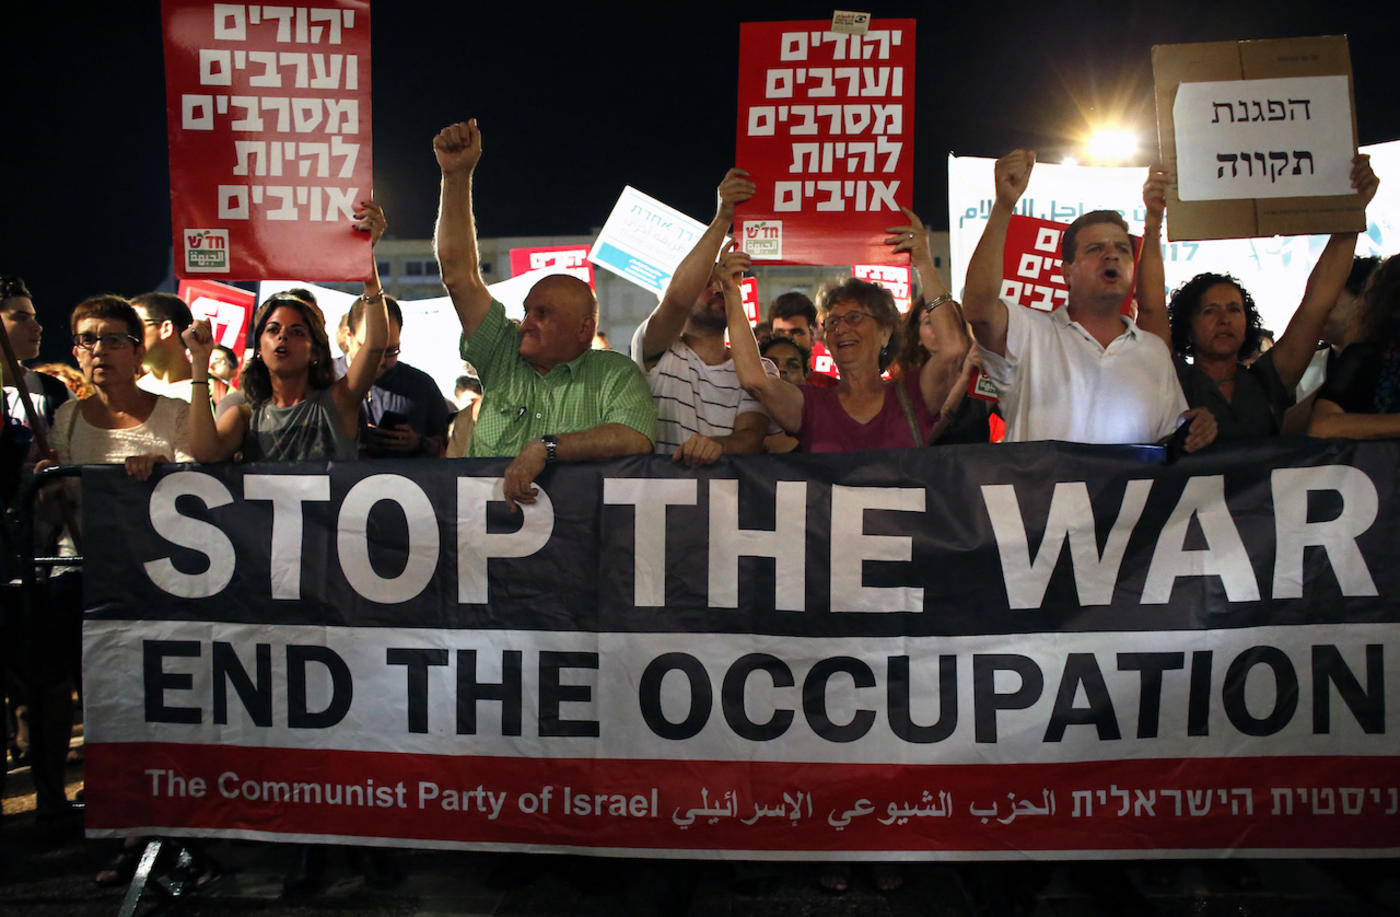 Israeli Communist Party supporters hold a "stop the war" banner as thousands of them gather at the Rabin Square in Tel Aviv on 62 July 2014 (AFP)